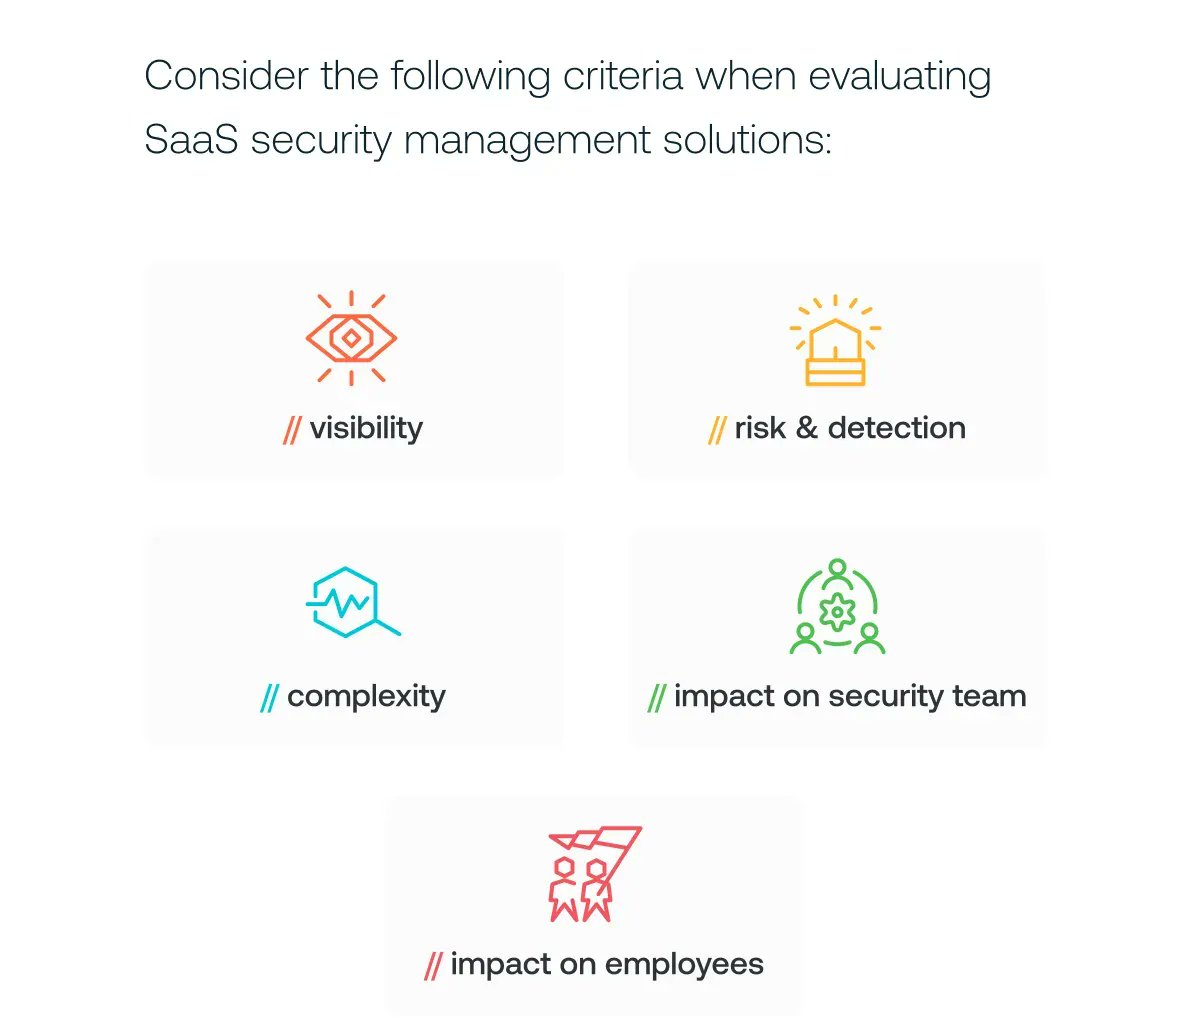 📘 Learn how to shortlist SaaS security solutions to evaluate and find out how to make a case for budget by discussing how #SaaSsecurity tools can help meet broader business initiatives

buff.ly/3OVQRJ0 

#SaaSManagement #secureSaaS #SupplyChain #Security #infosec